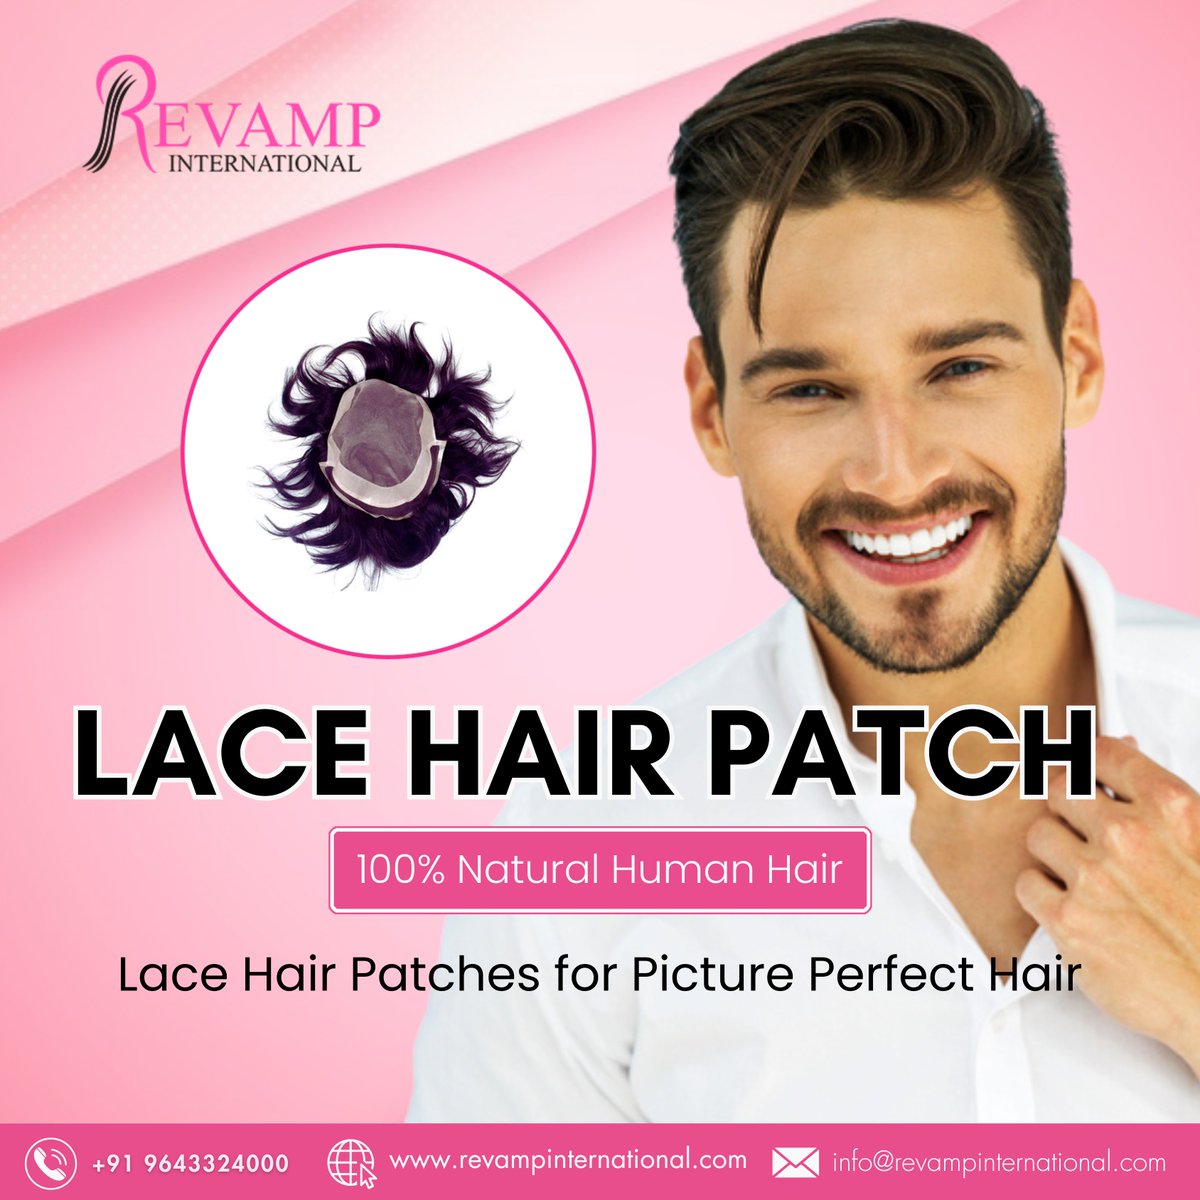 Transform your look with our lace hair patch - seamless, natural, flawless 🌟✨

Say hello to your new favorite accessory for any occasion 💁‍♀️

#HairPatch #HairTransformation #ConfidenceBoost #Lacrhairpatch #Hairrestoration #Hairlosssolution #Thinninghair #Hairgrowth #Haircare